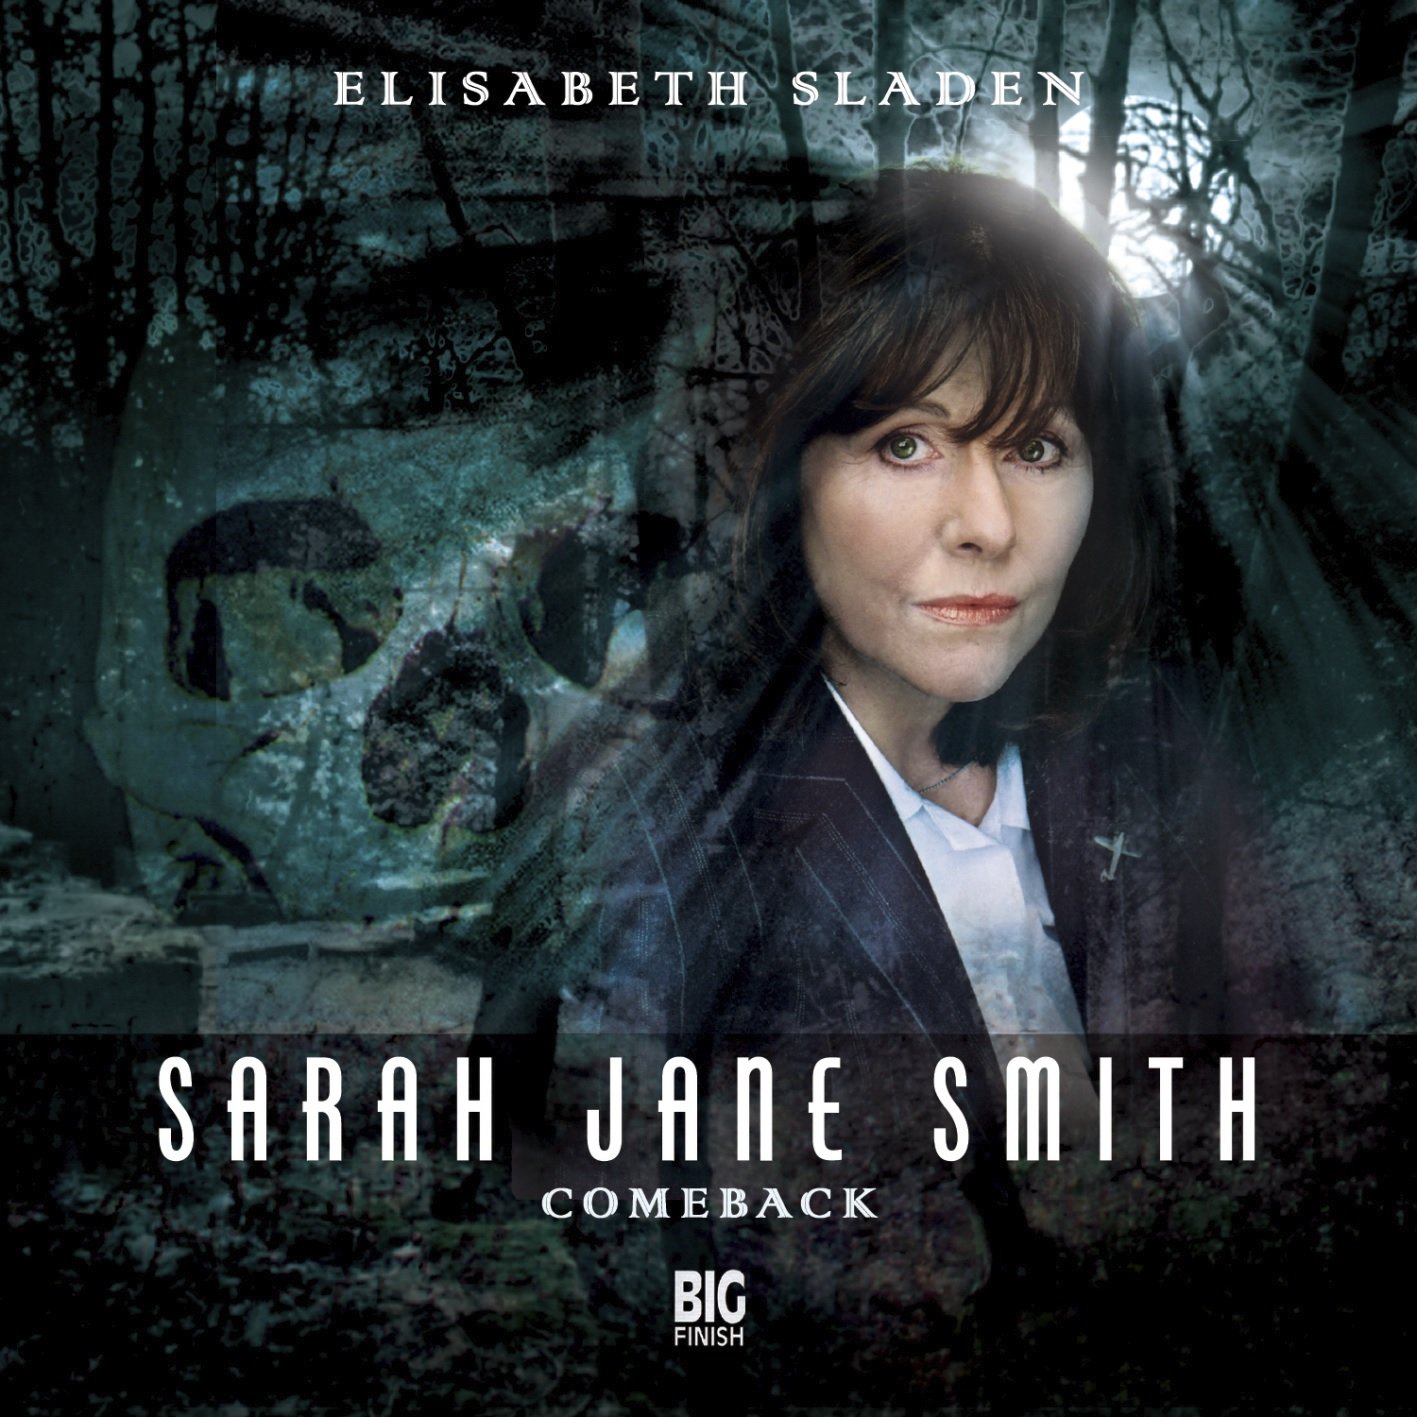 Listen to Big Finish’s Sarah Jane Smith: Comeback For Free Now!